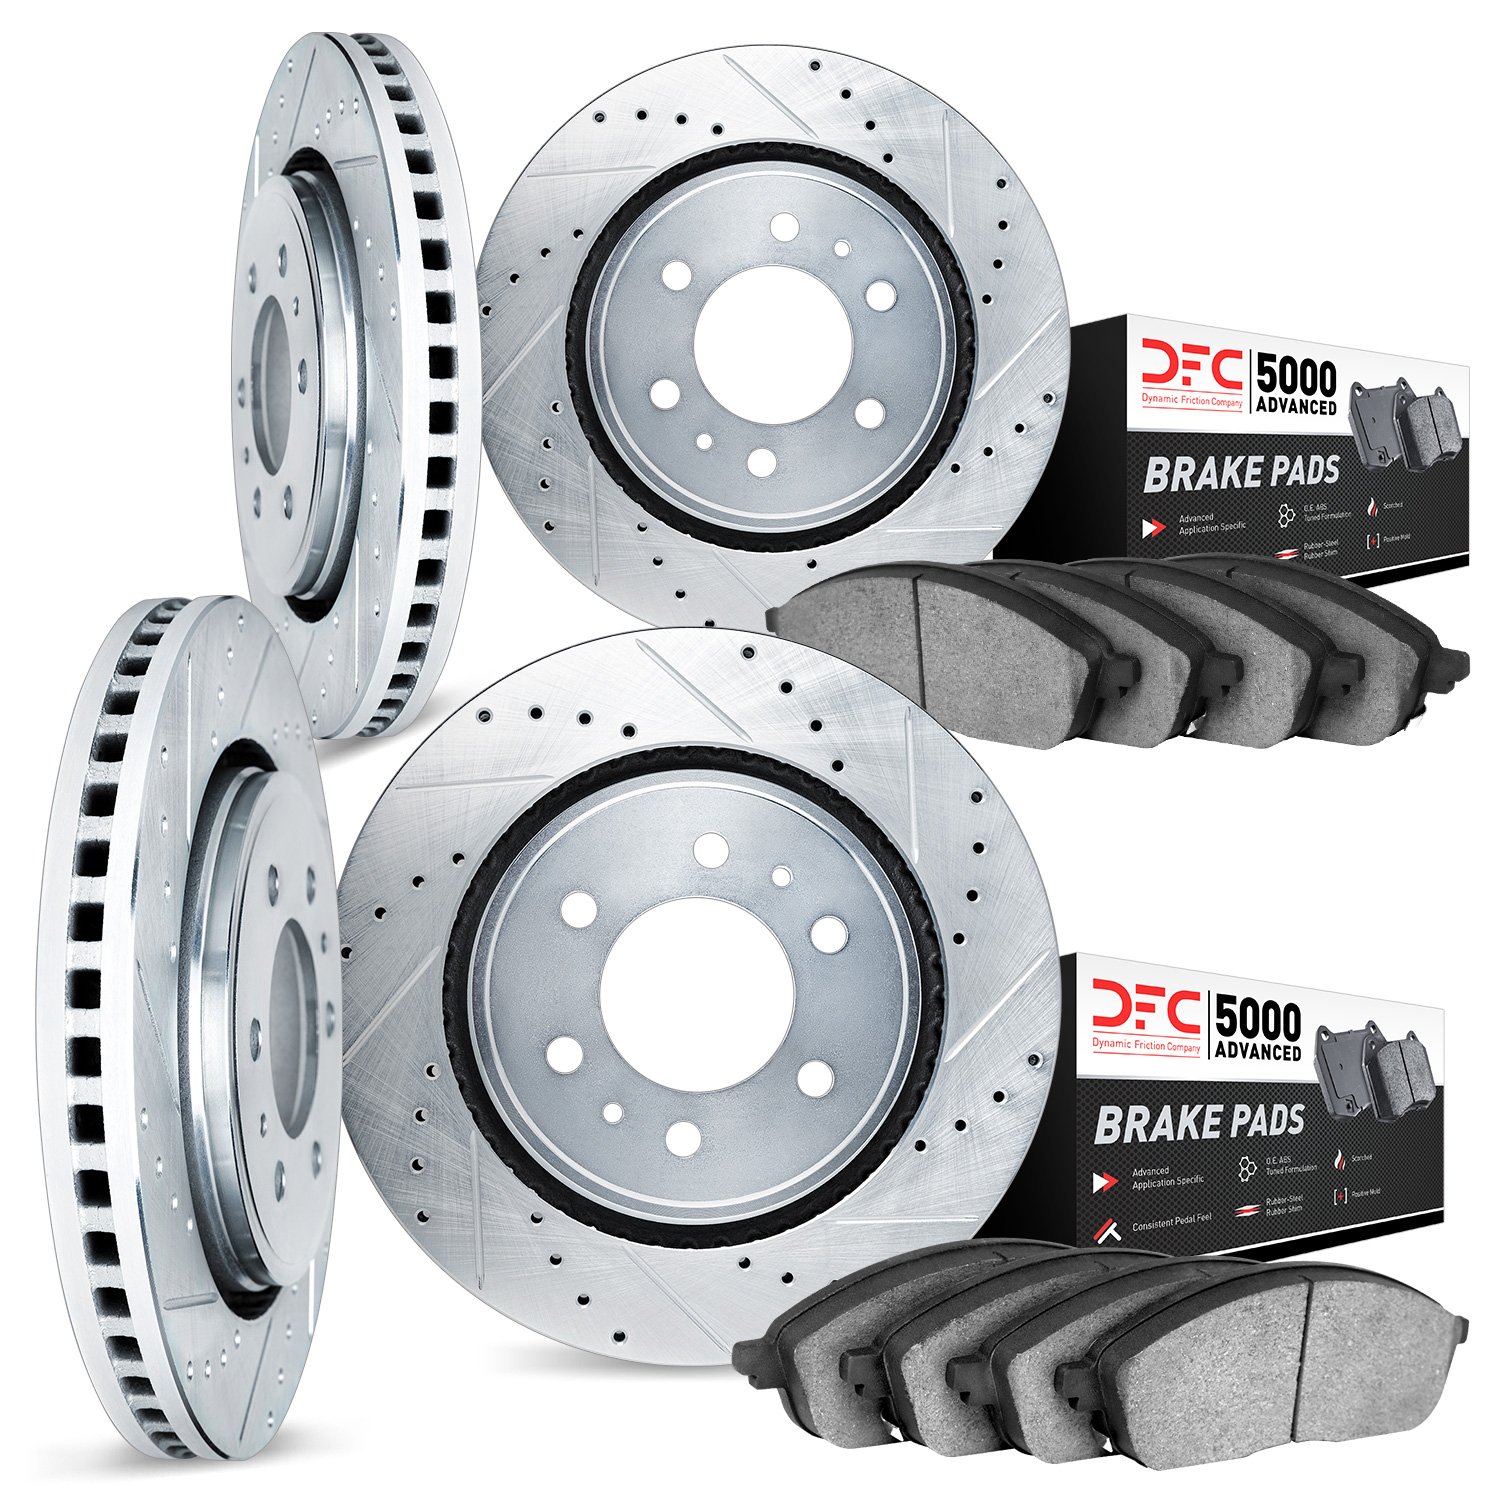 7504-37008 Drilled/Slotted Brake Rotors w/5000 Advanced Brake Pads Kit [Silver], 2001-2004 Multiple Makes/Models, Position: Fron